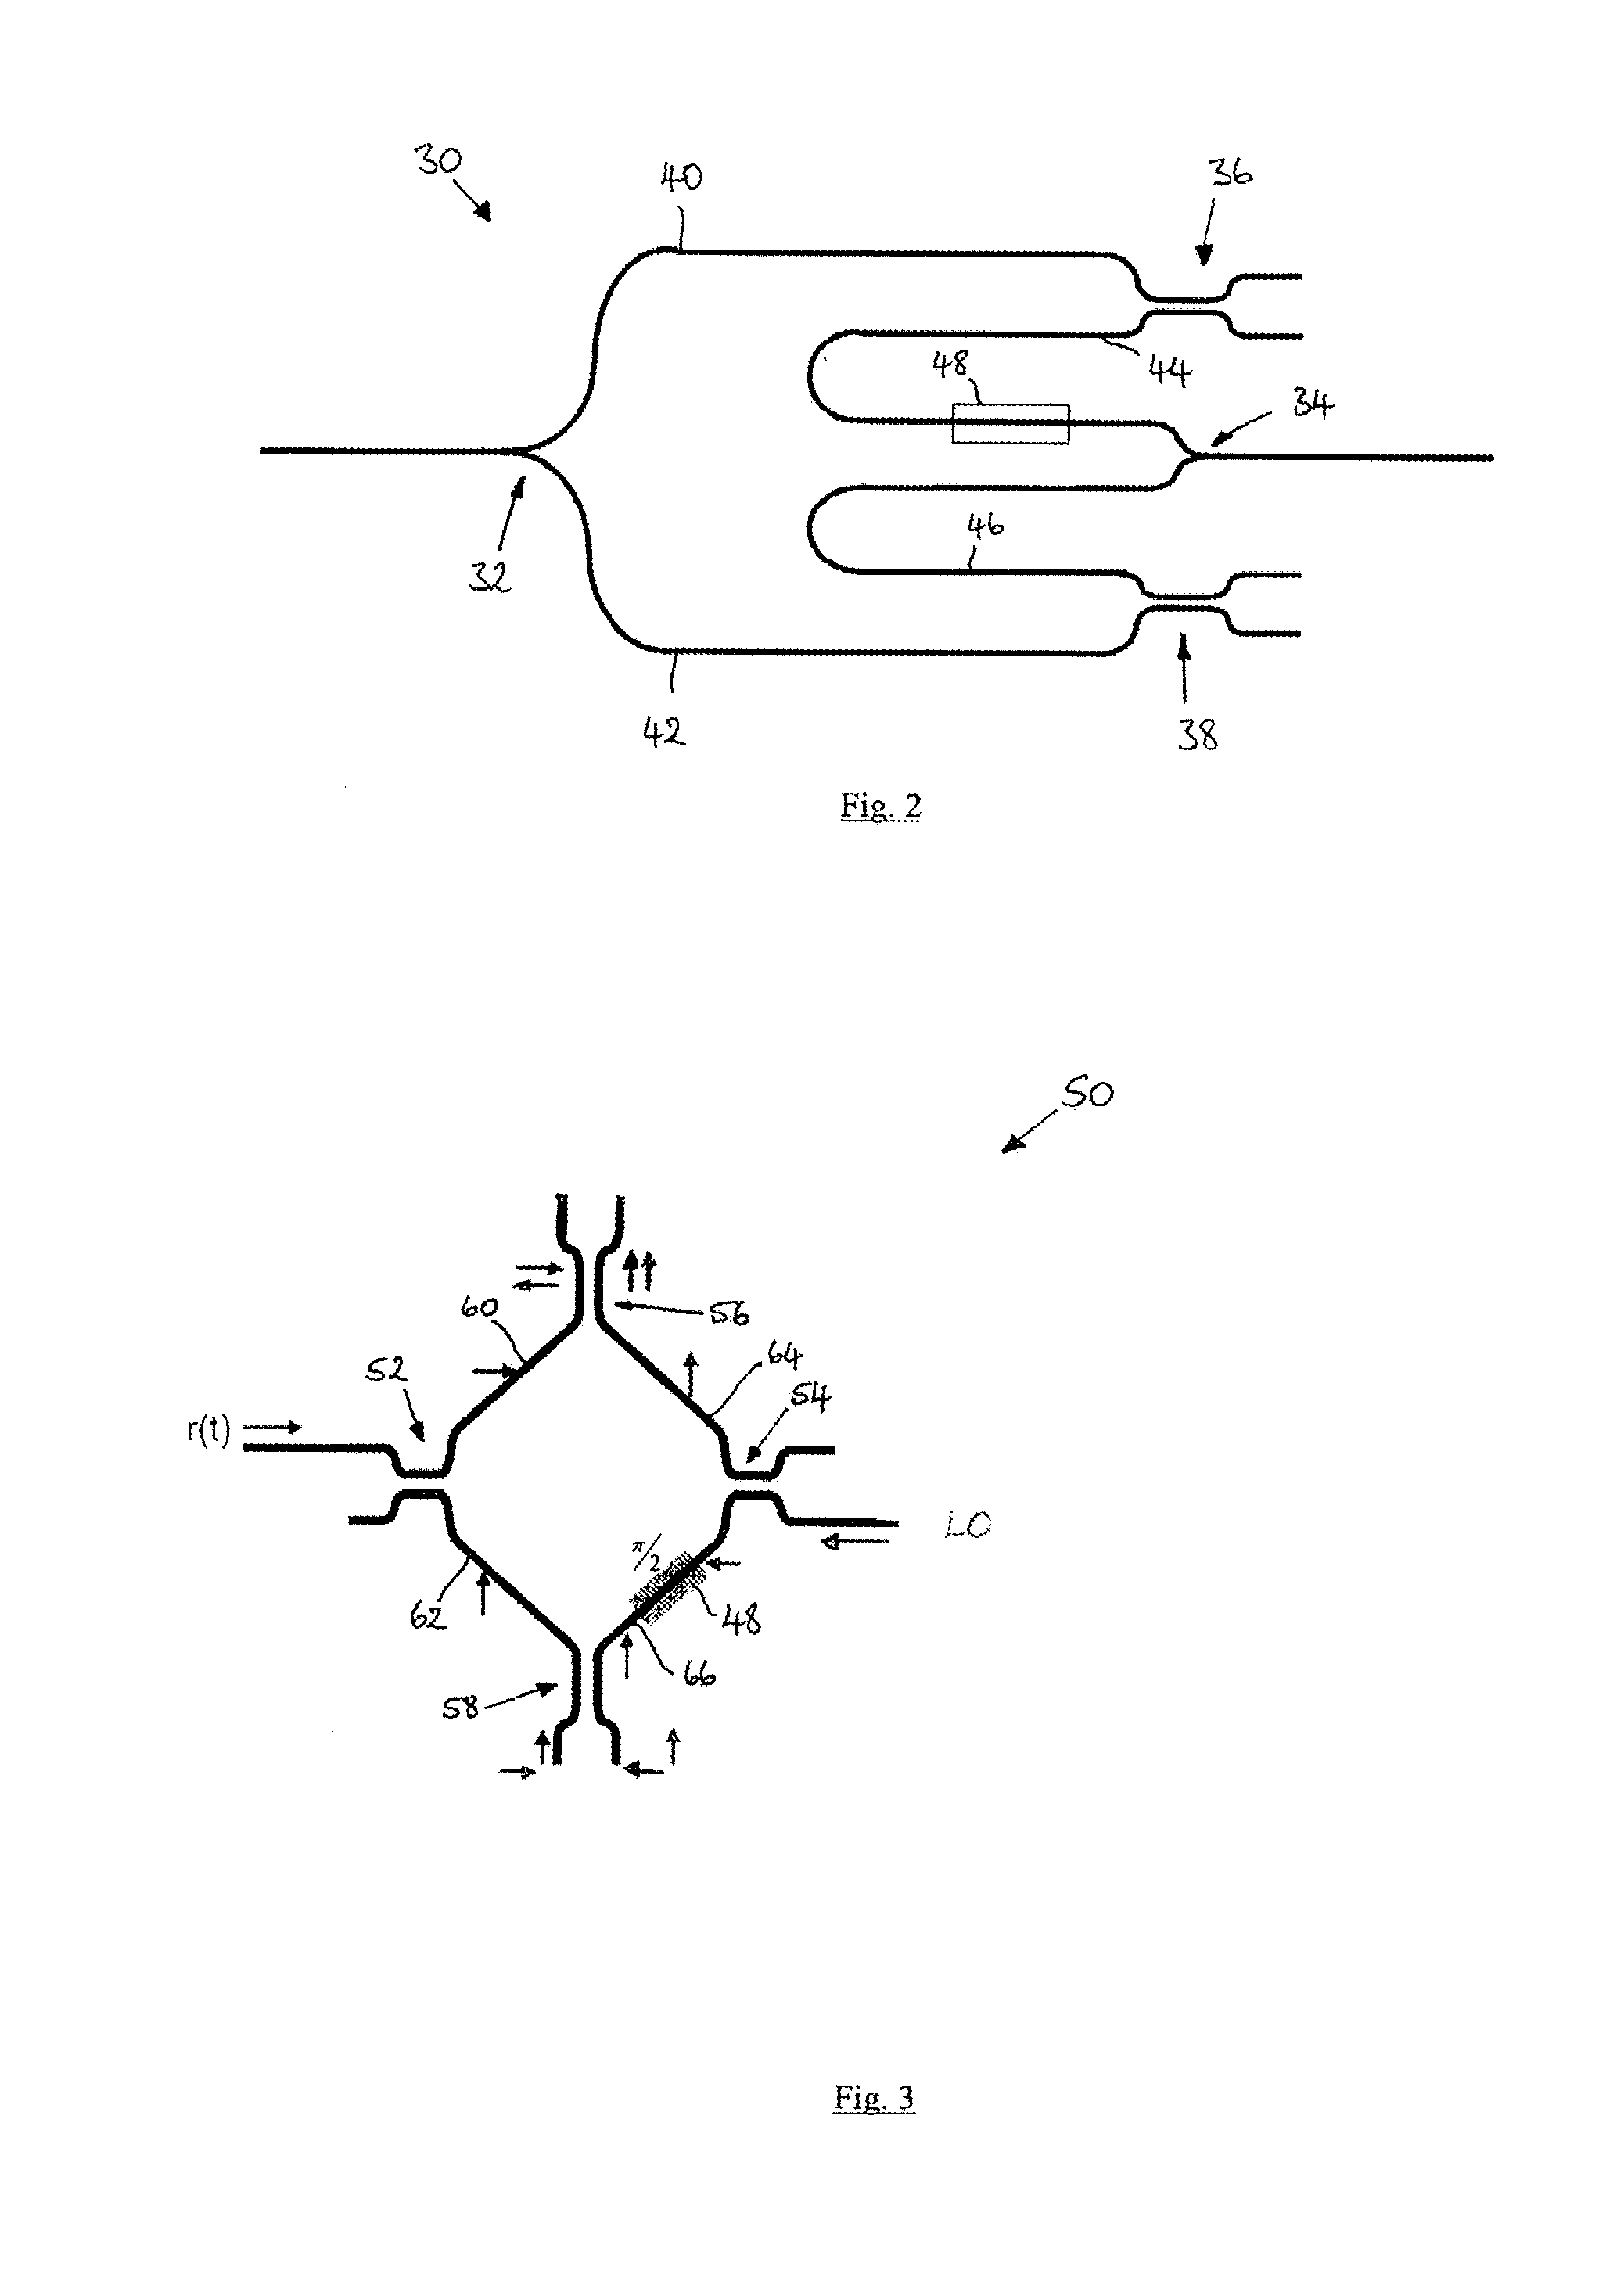 Planar Waveguide Circuit and Optical Receiver